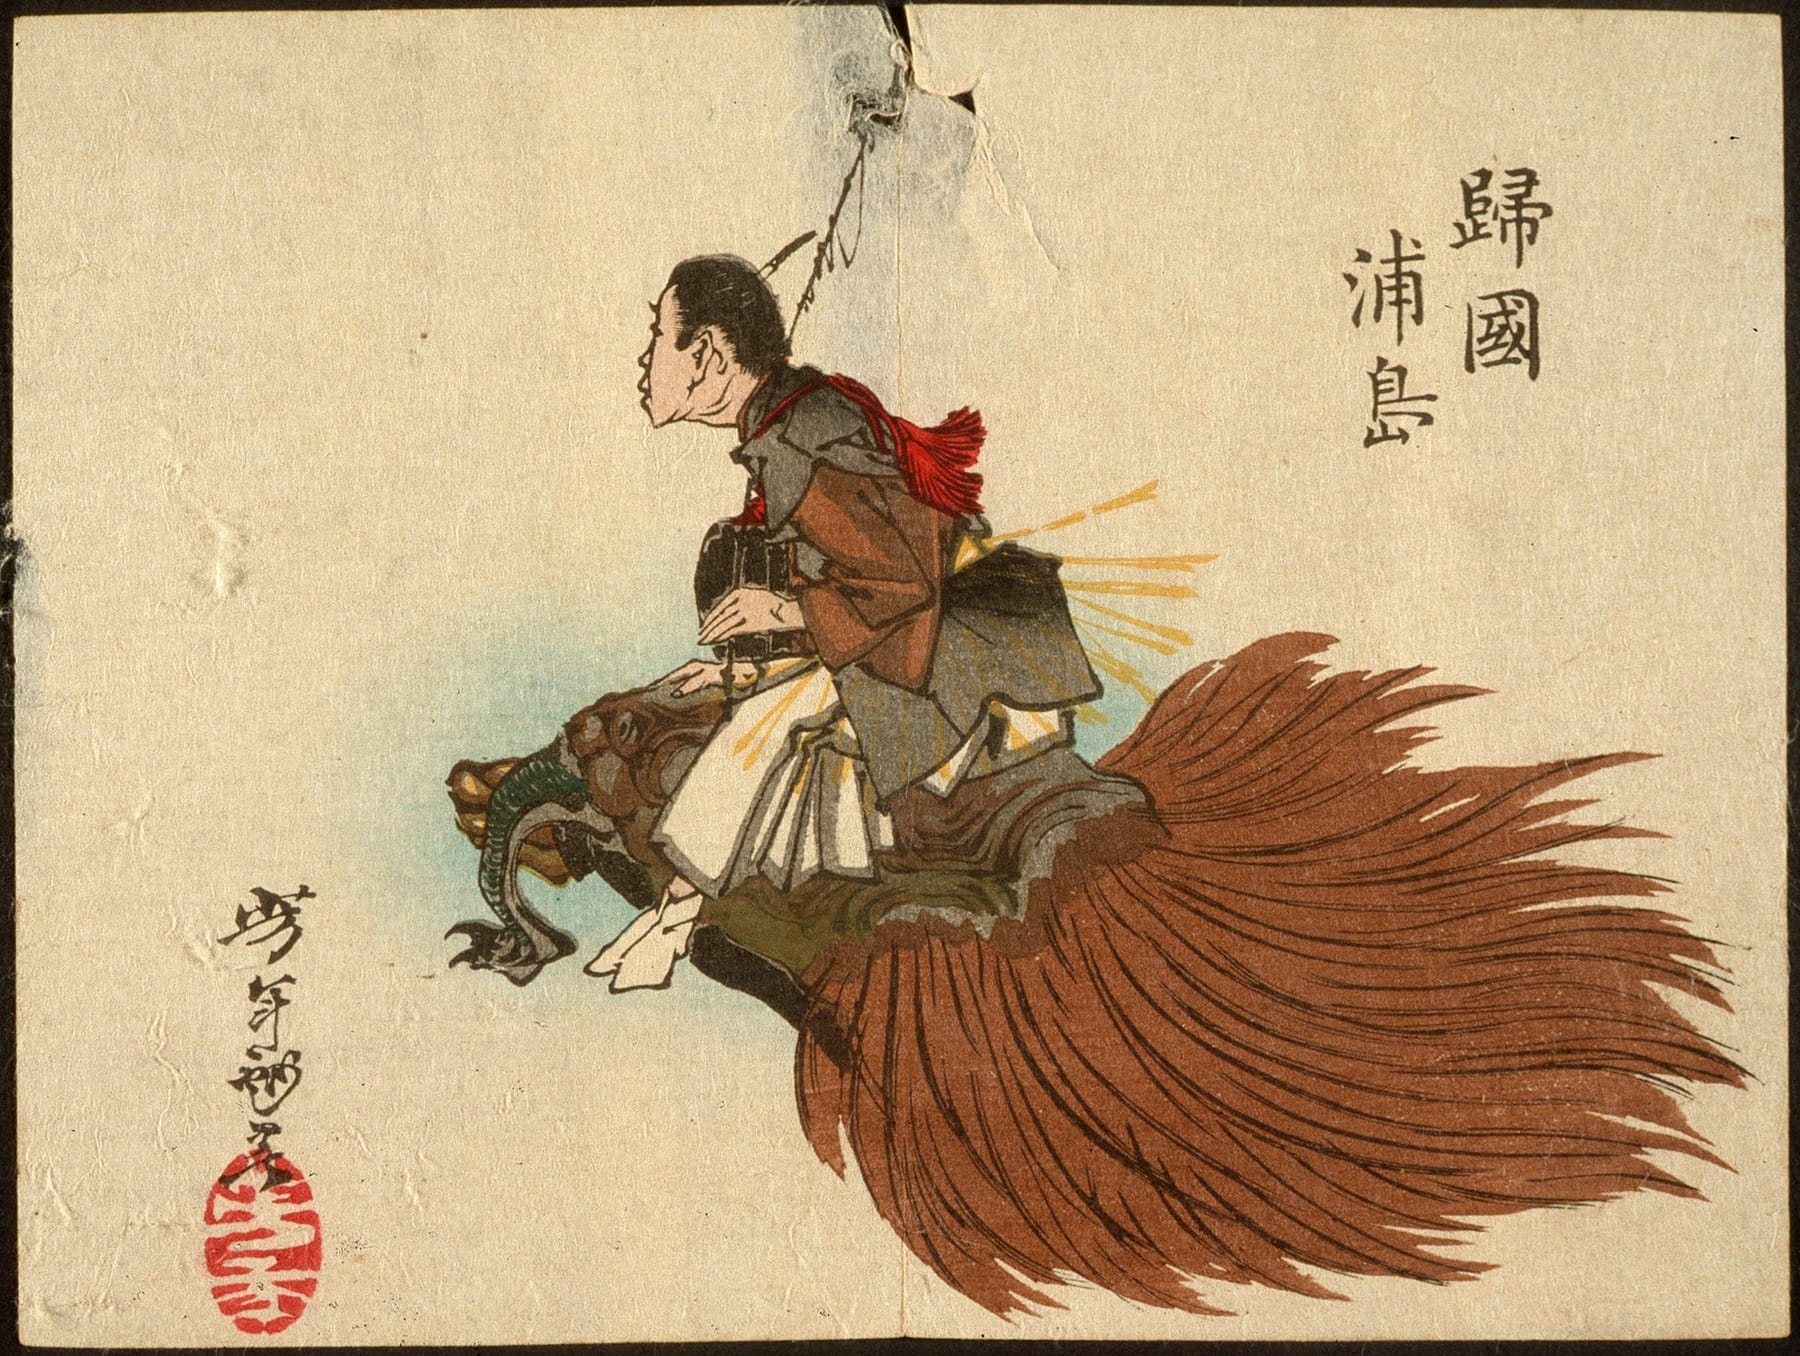 Urashimatarō riding a turtle with a long tail, the title written in kanji on the top right corner, signed in the left bottom corner